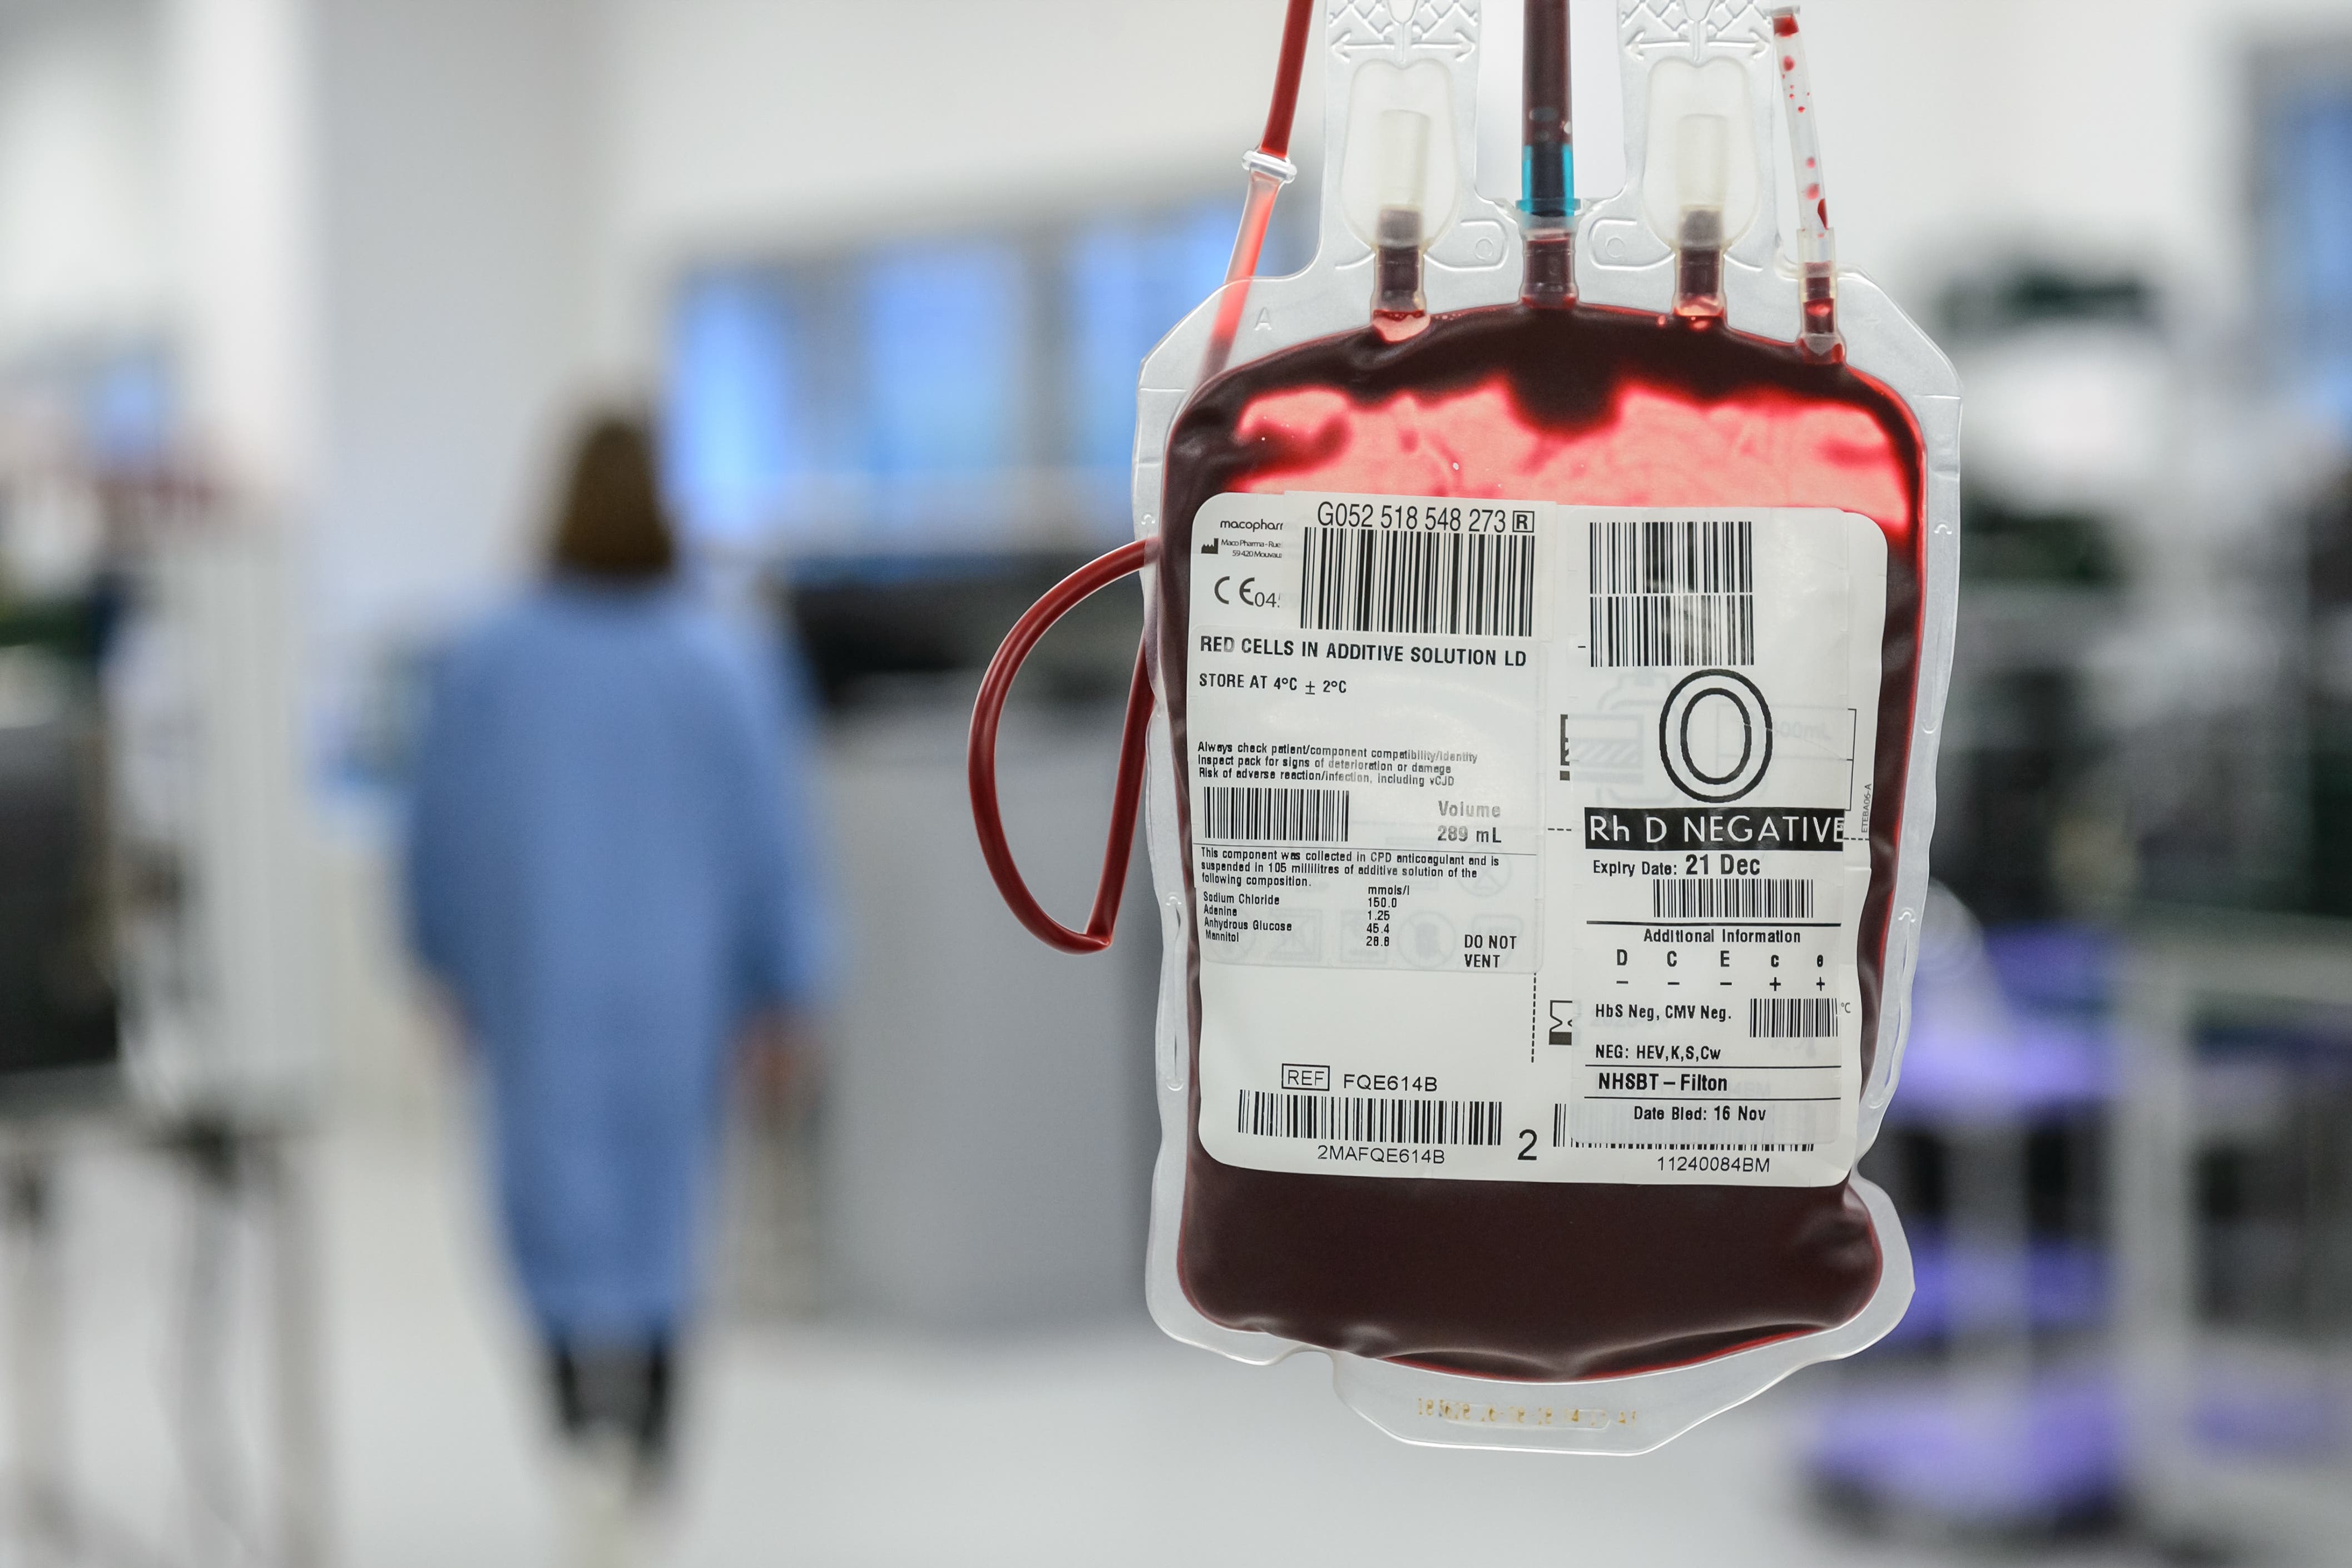 Blood transfusion errors in A&E are on the rise, and patients are paying the price